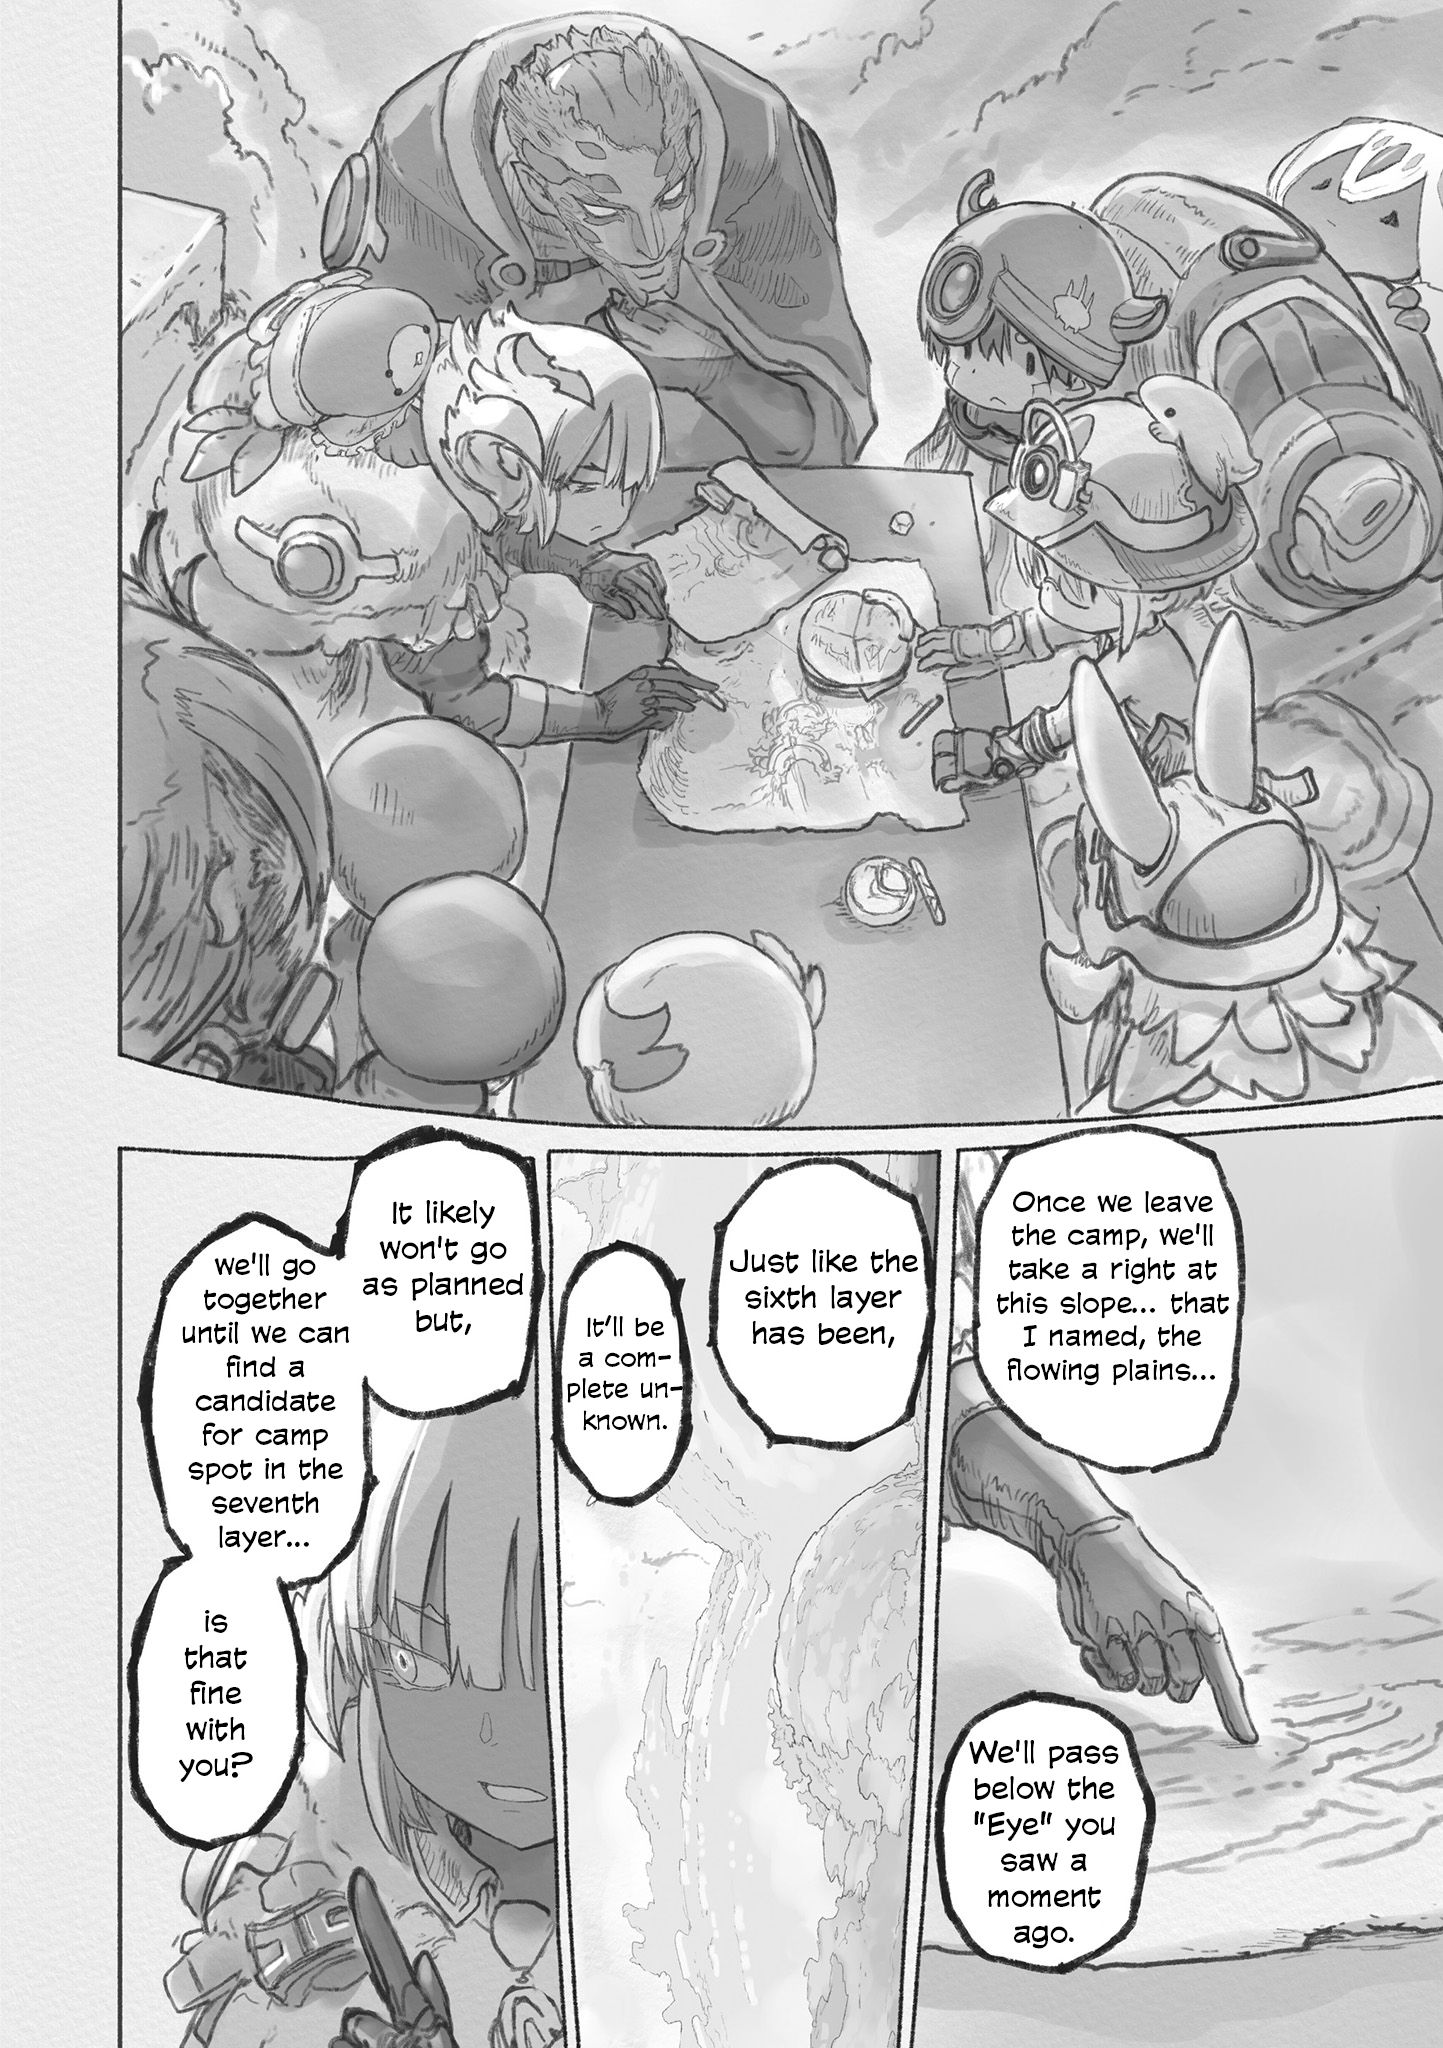 Made in Abyss Chapter 066, Made in Abyss Wiki